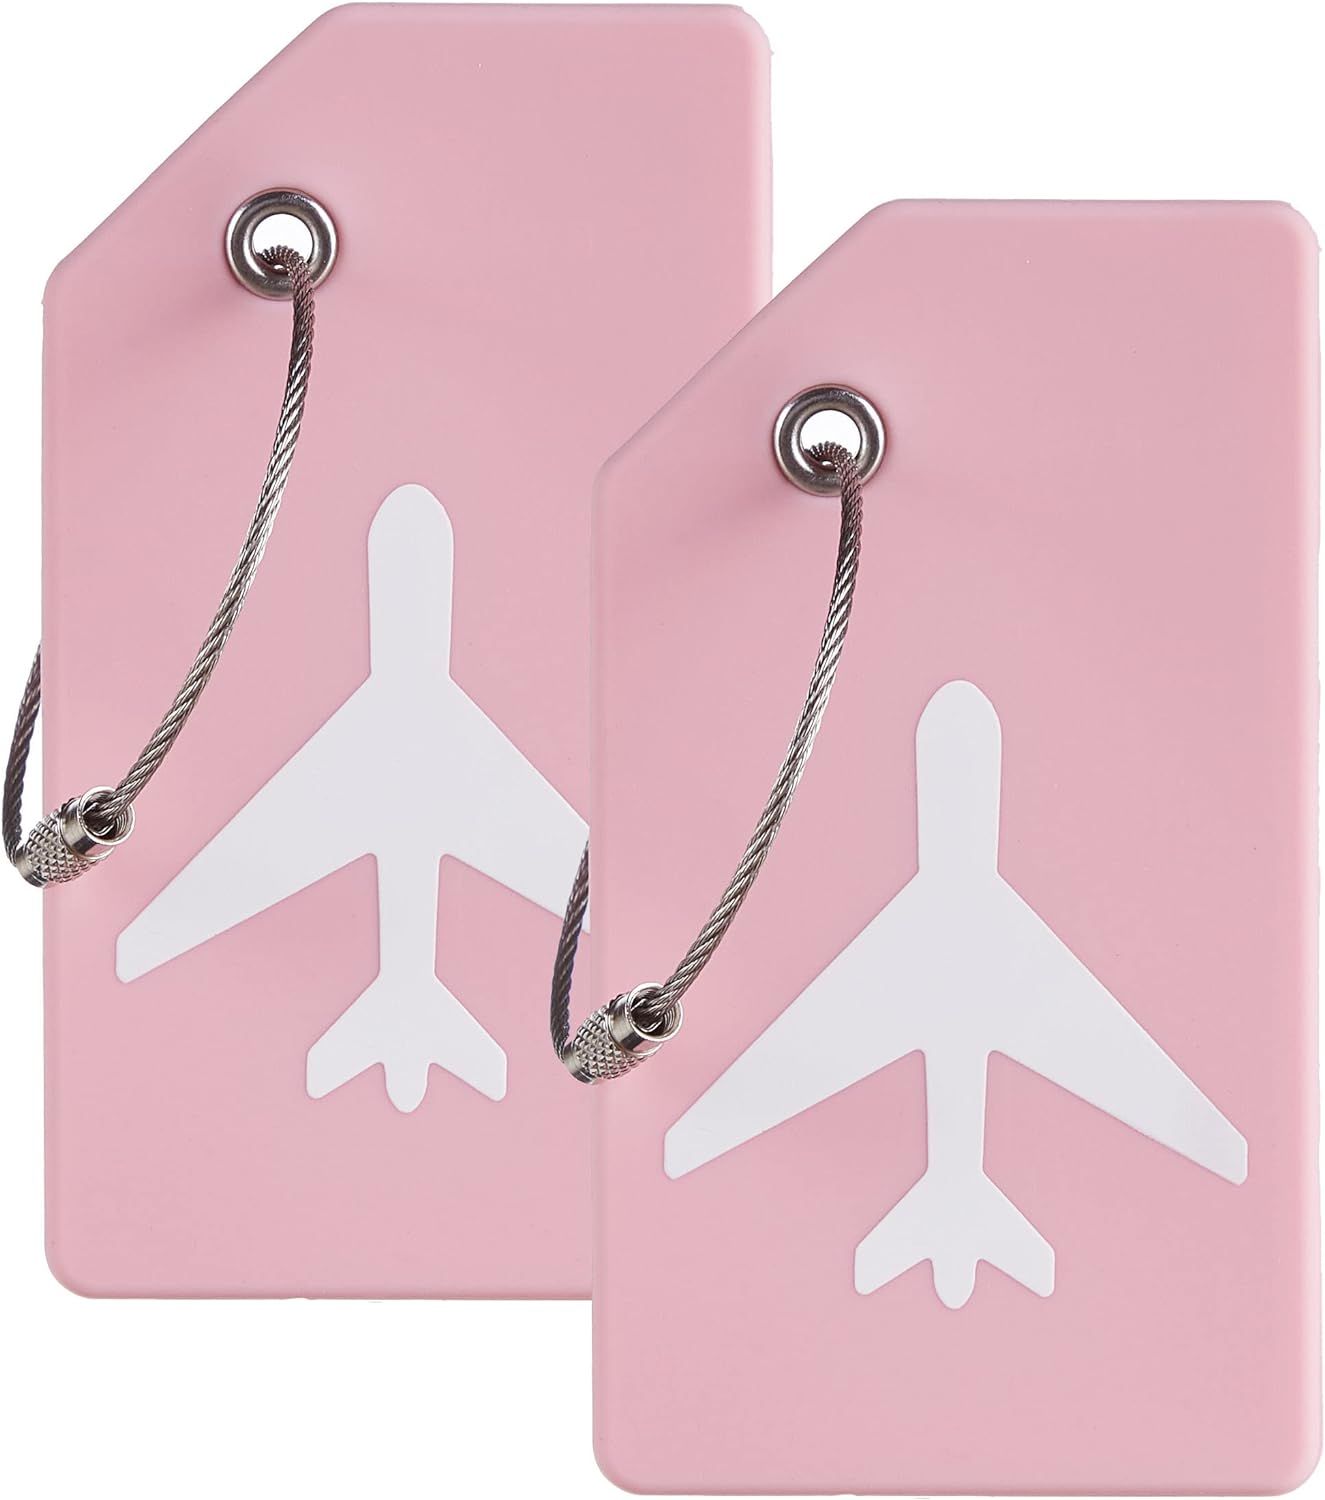 2 Pack Silicone Luggage Tag Baggage Handbag School Bag Suitcase Instrument Tag Label by Gostwo (P... | Amazon (US)